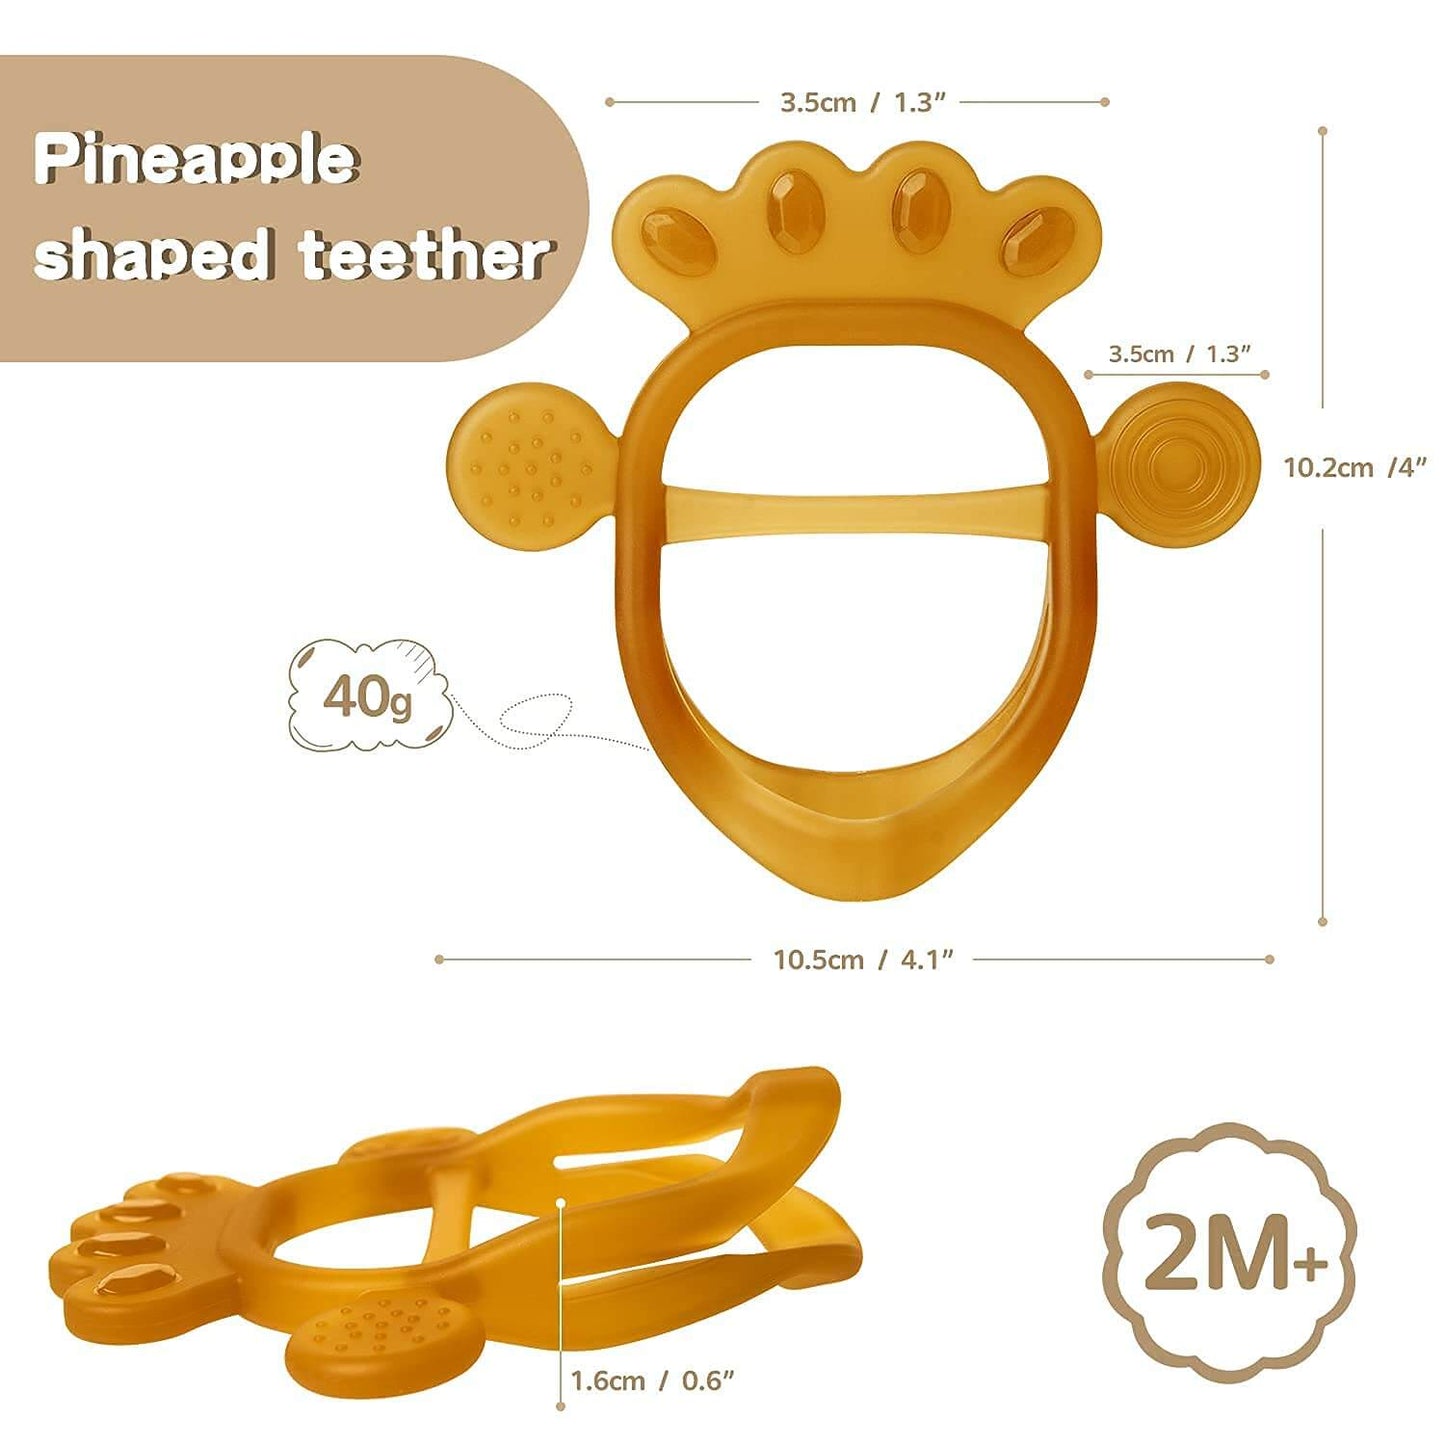 【Never Drop from Hand】Wristband Design Baby Teething Toys for Babies 2M+